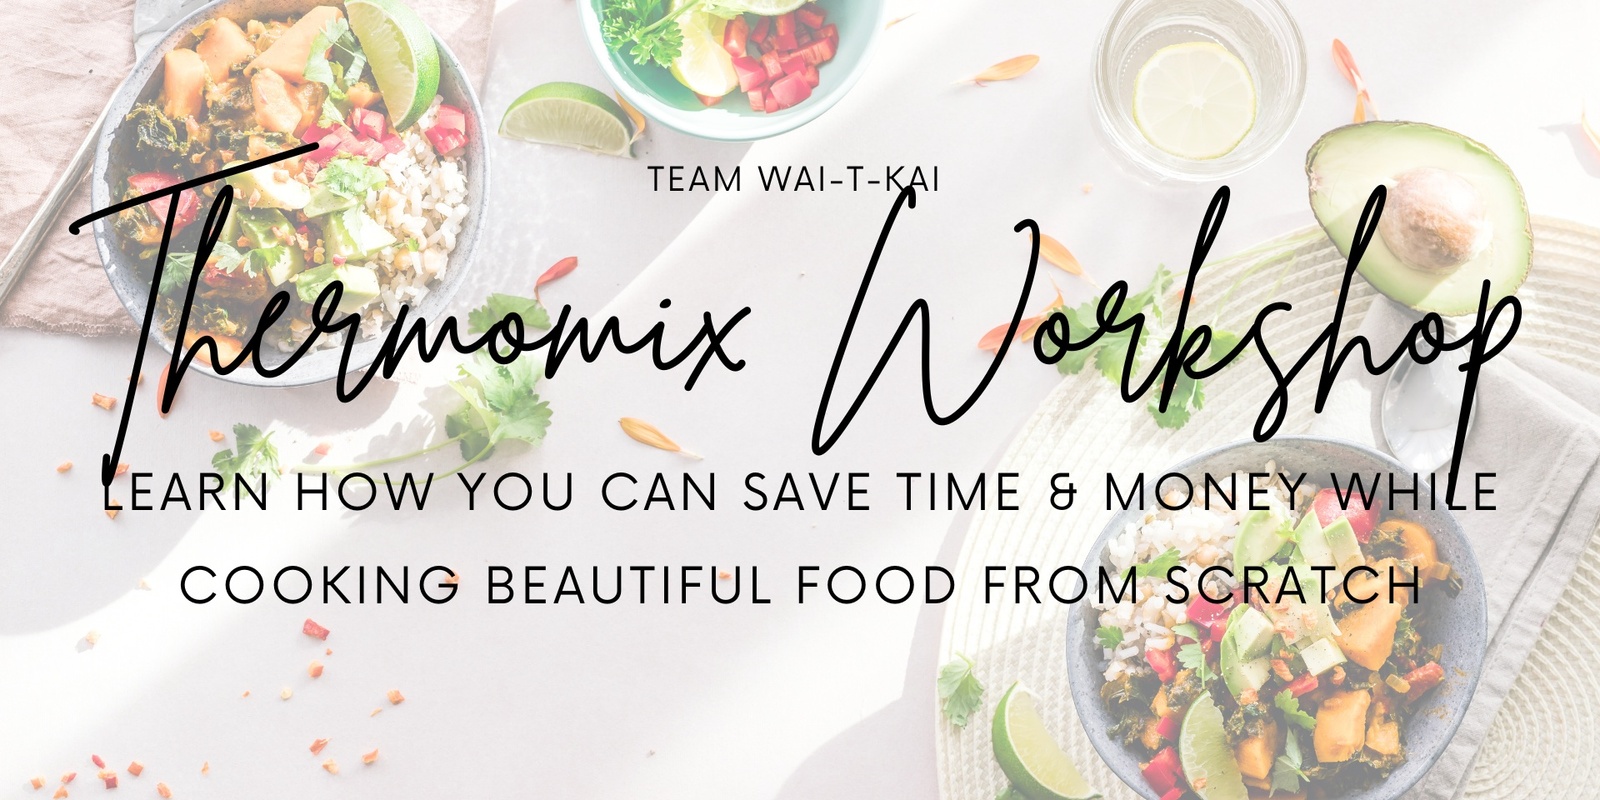 Banner image for Thermomix Workshop 